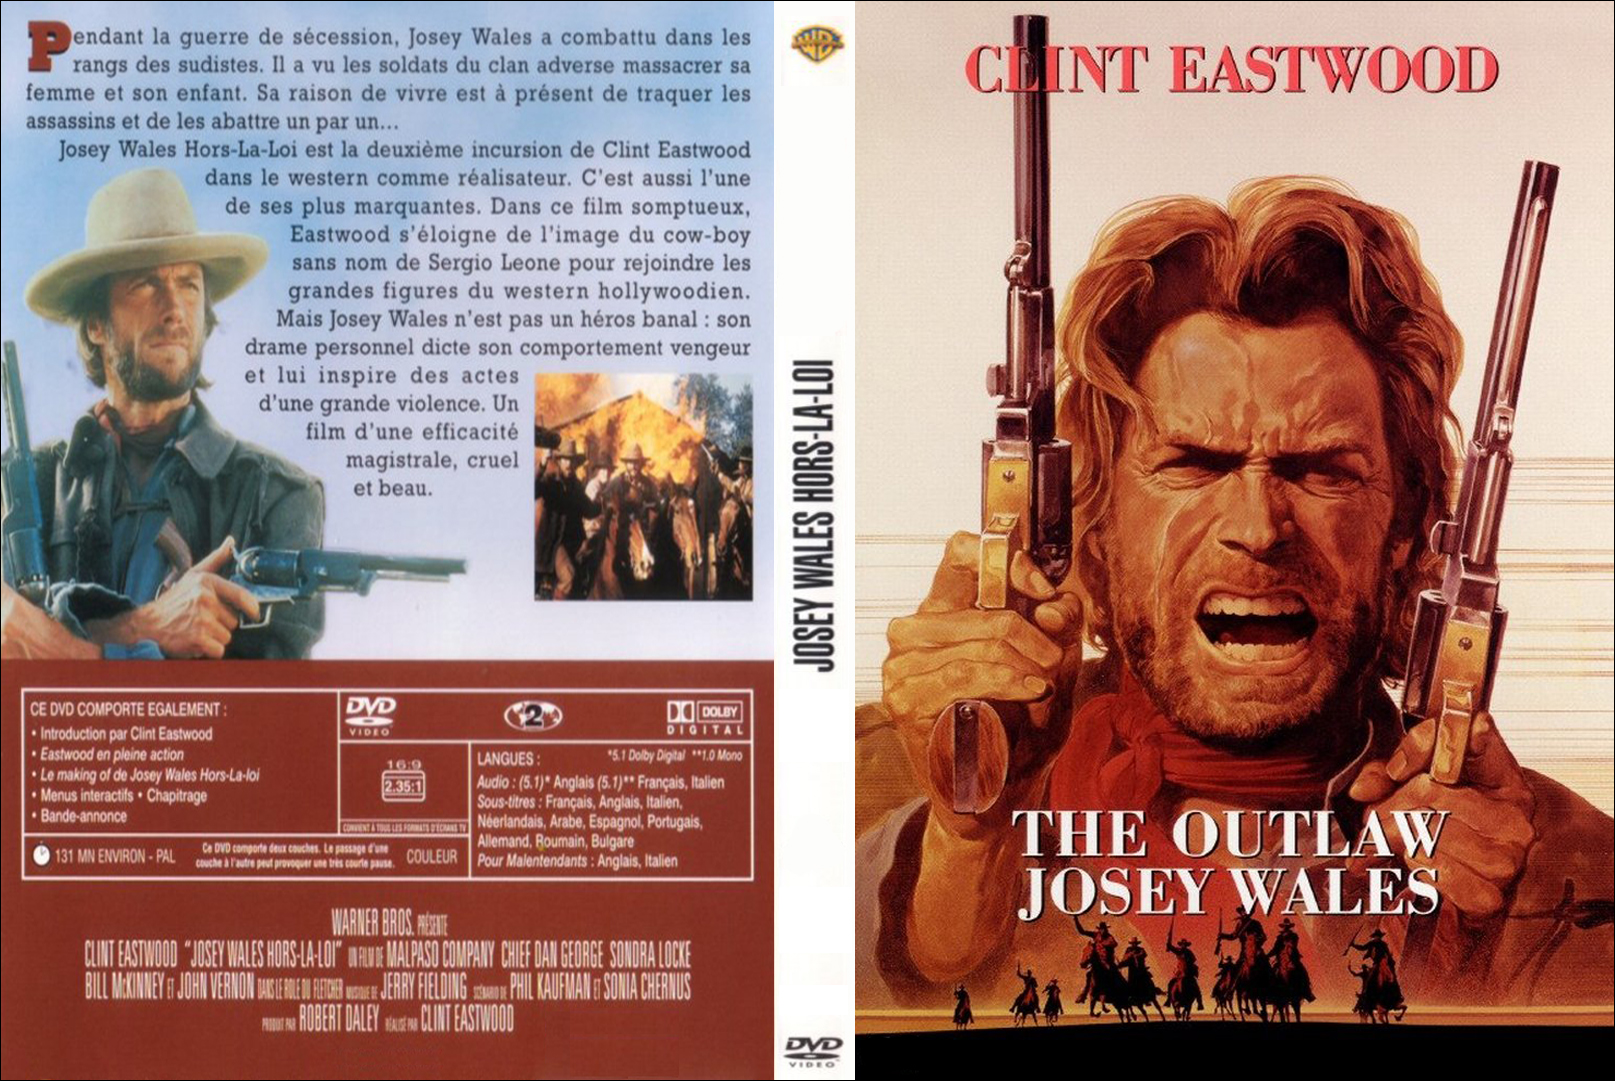 Jaquette DVD Josey Wales Hors-la-Loi - The Outlaw Josey Wales